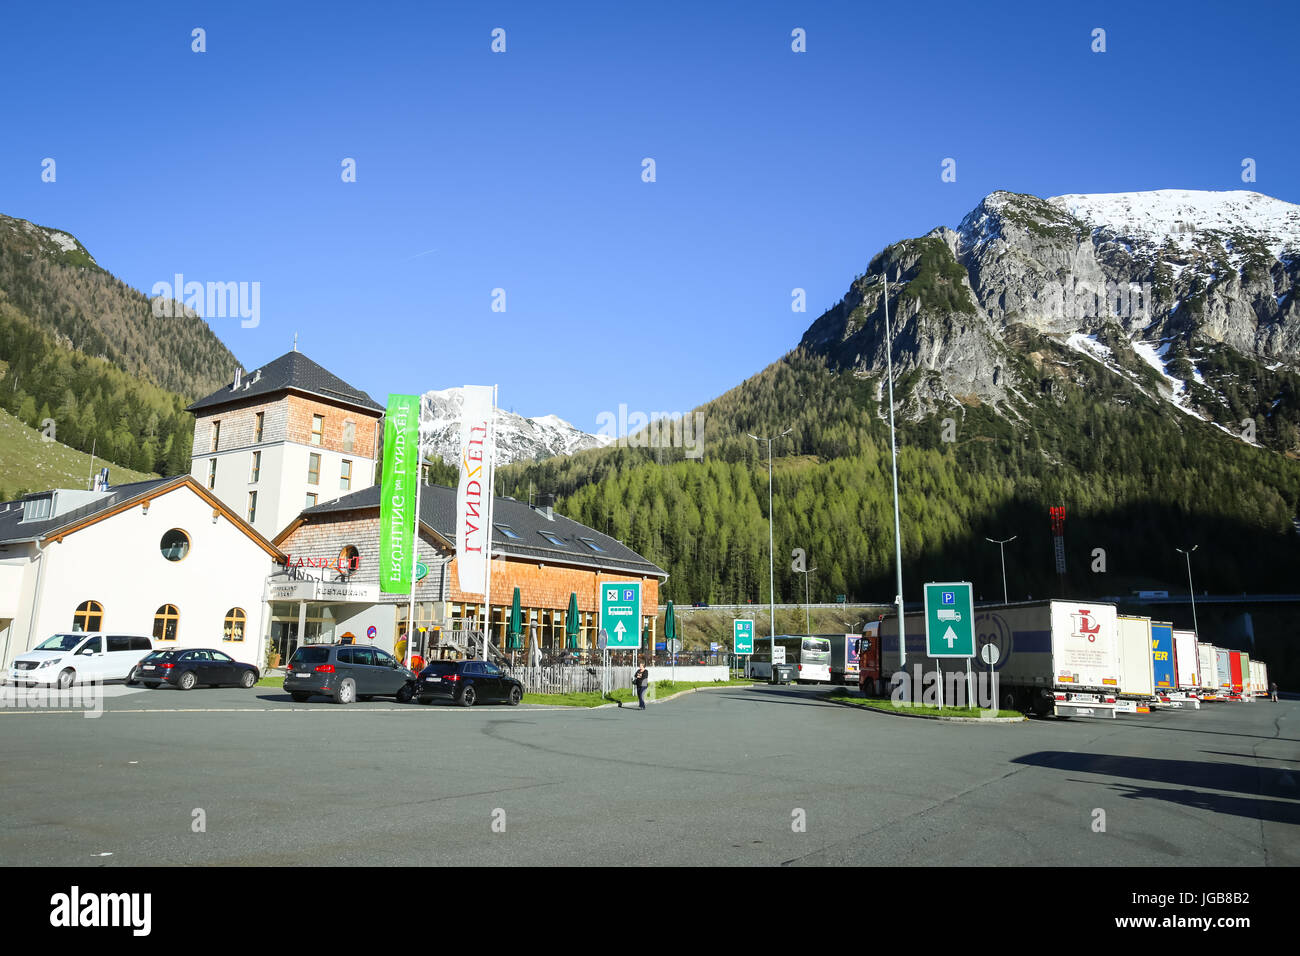 FLACHAU, AUSTRIA - MAY 10, 2017 : The highway rest stop with a gas station and the Landzeit Tauernalm hotel and restaurant in Alps environment in Flac Stock Photo